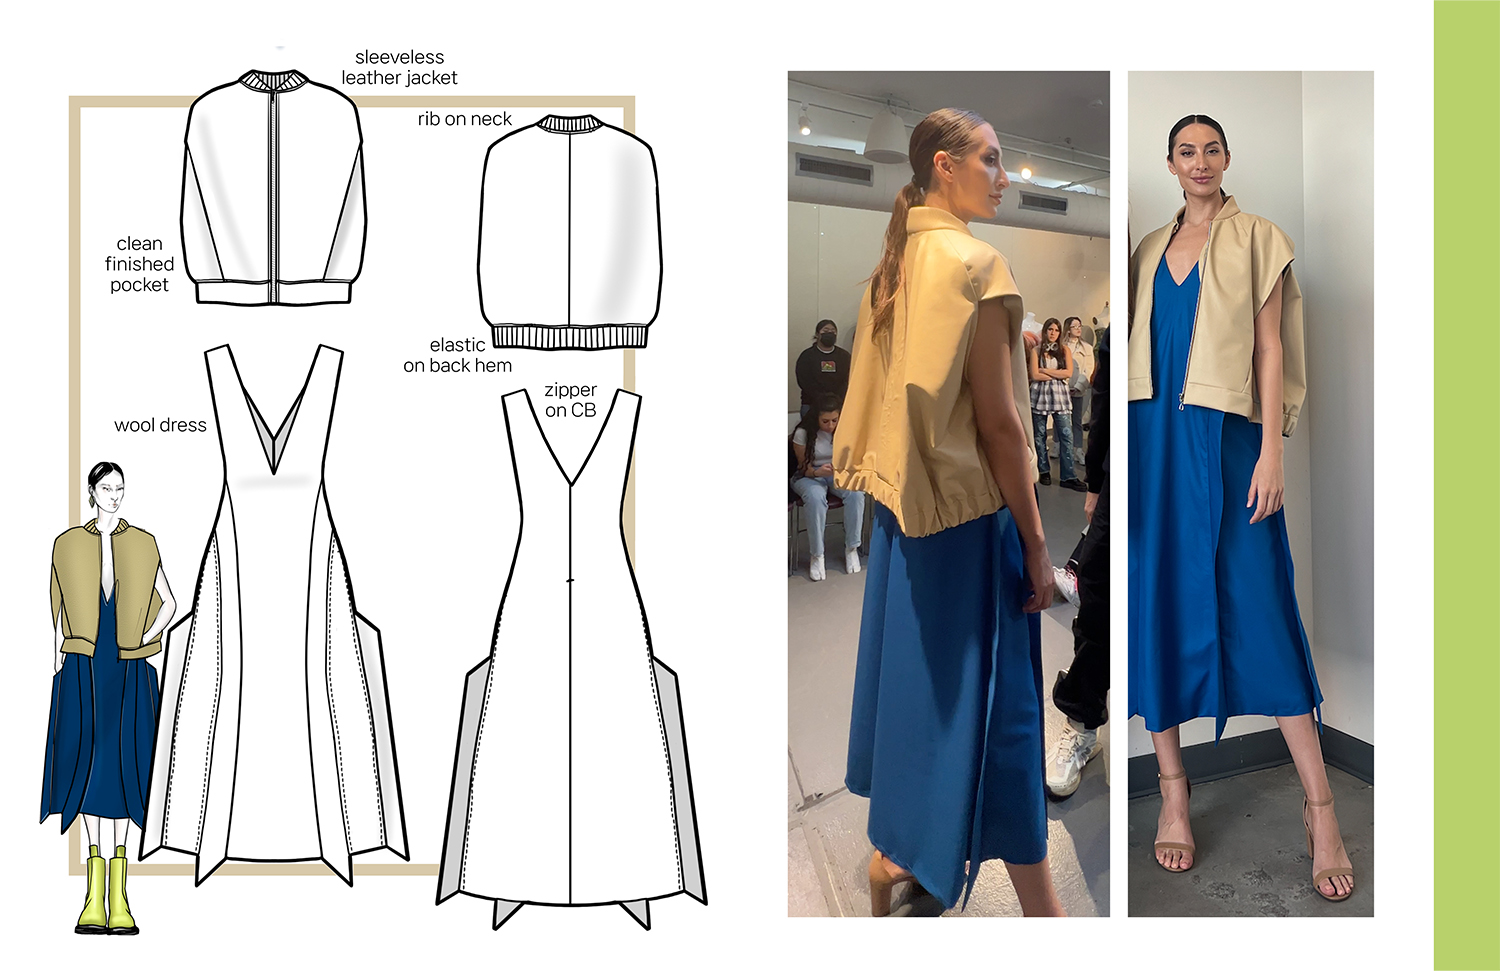 Elaborated Structure Design and Garment